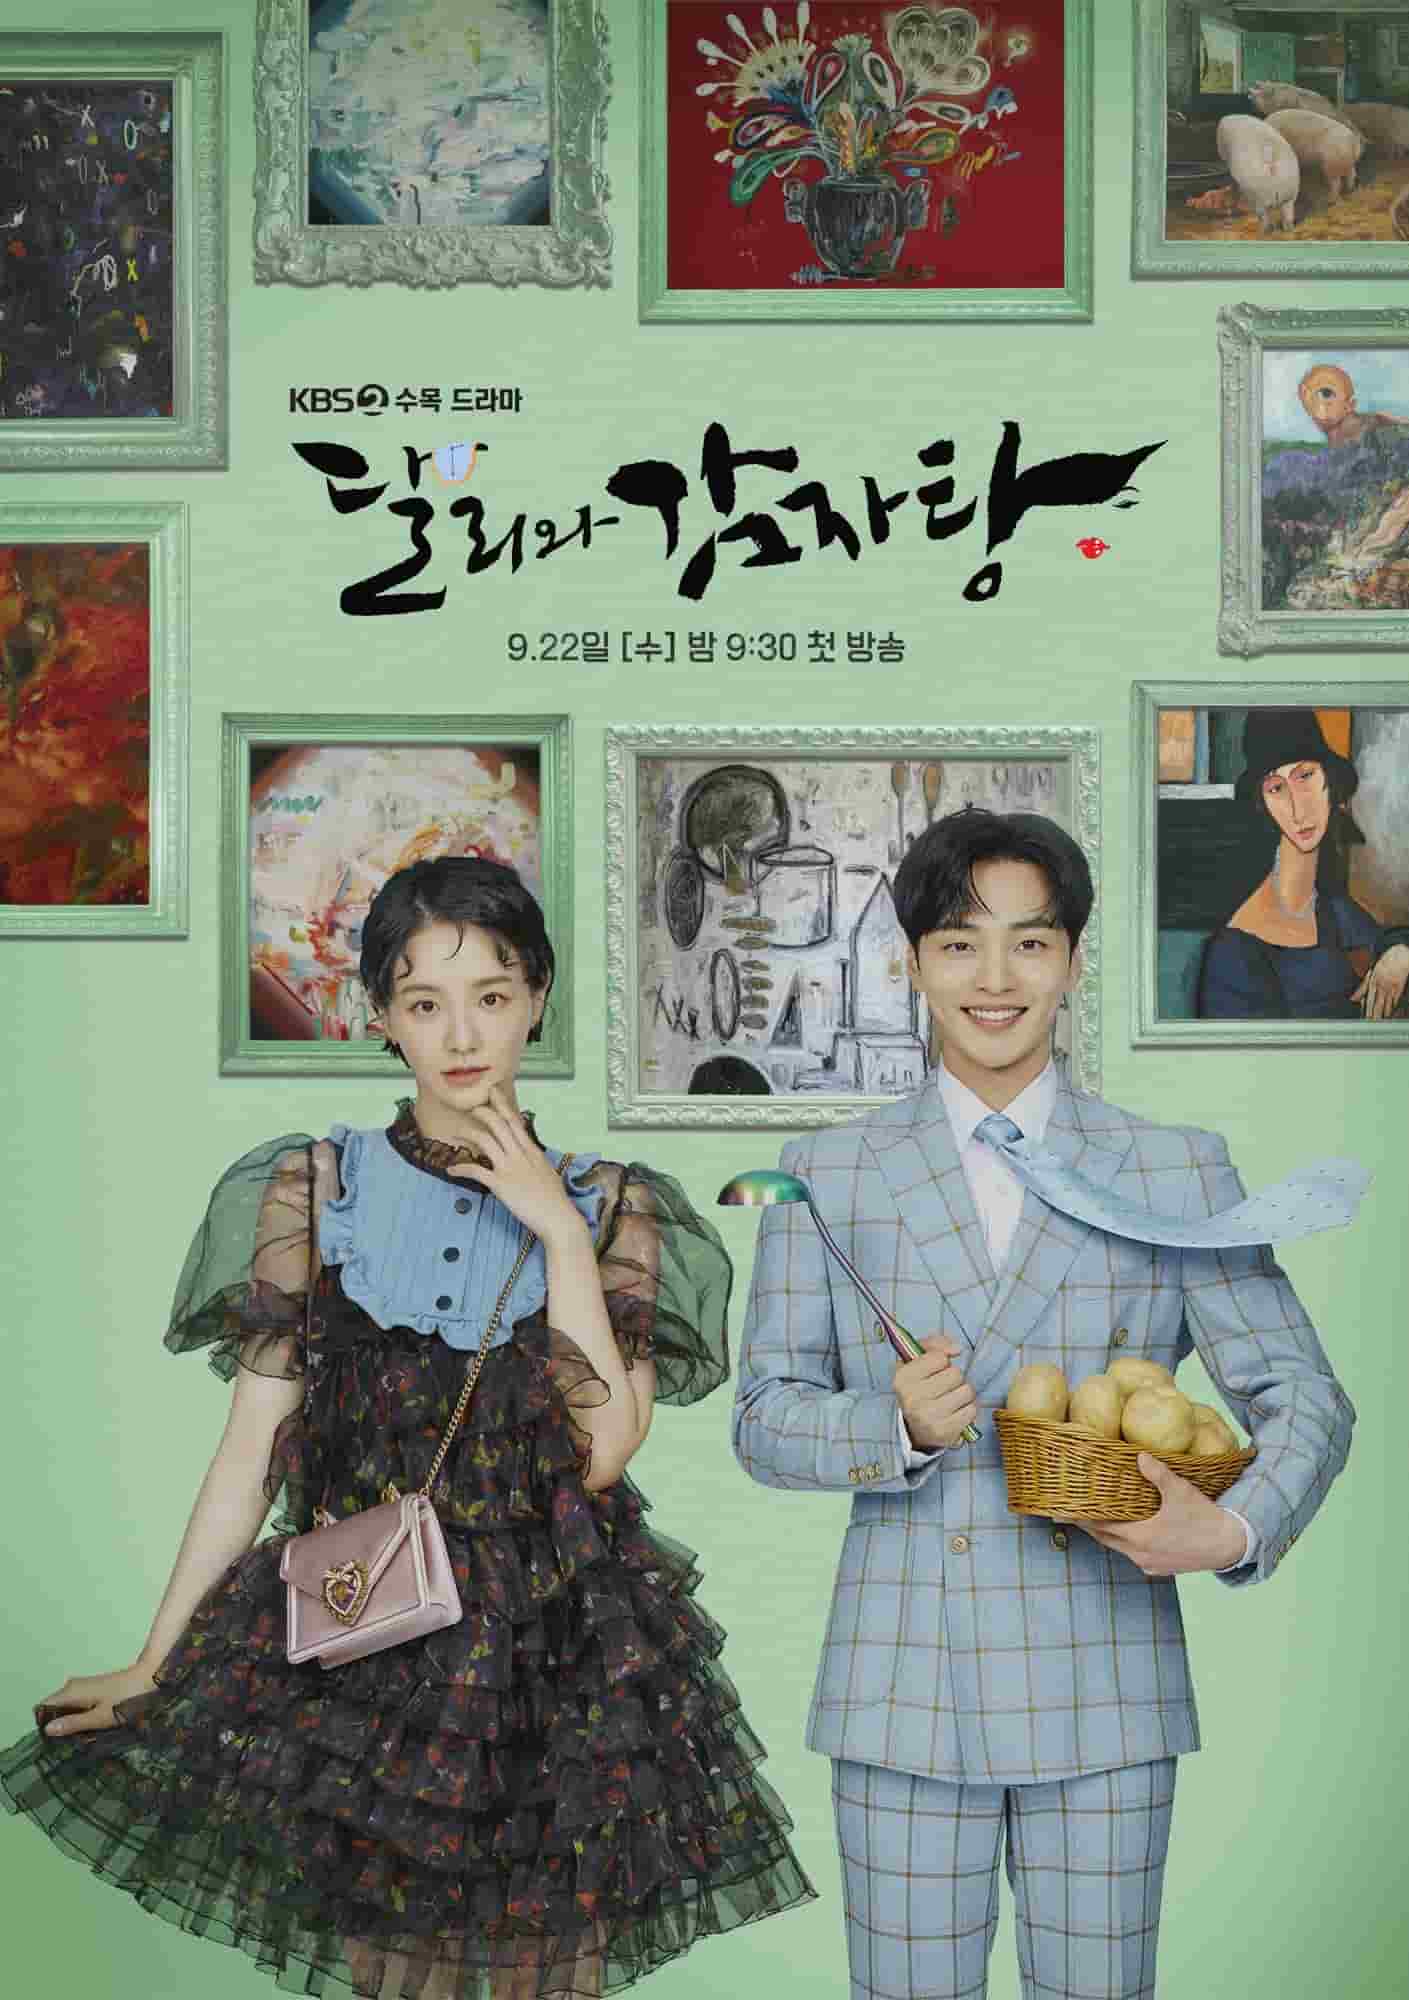 Dali and Cocky Prince - Cast, Summary, Synopsis, OST, Episode, Review